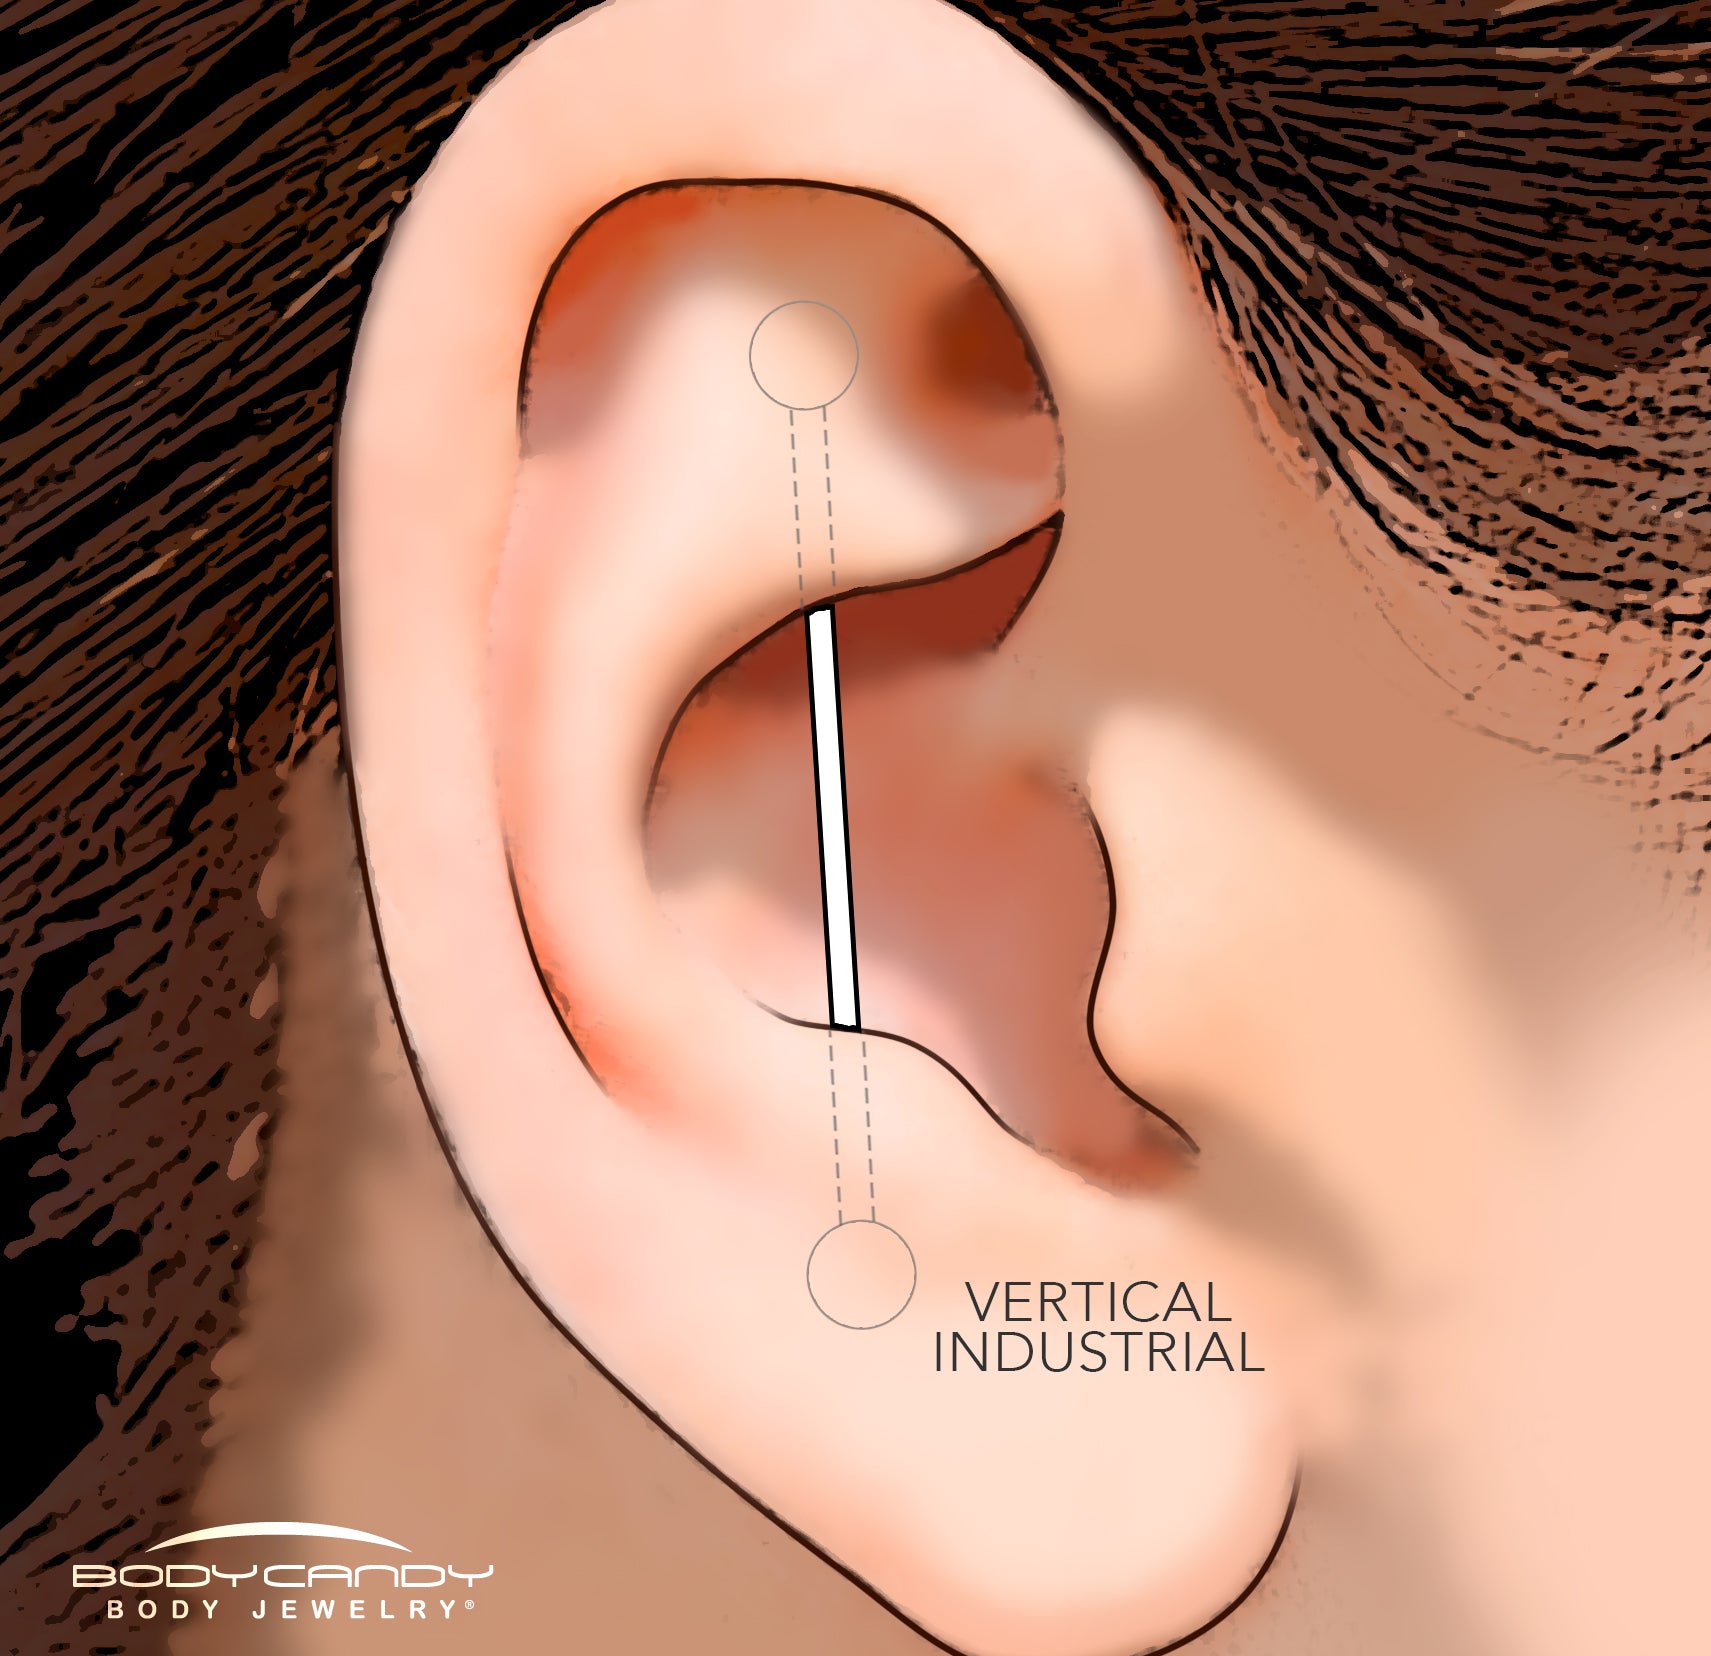 What are Multi-Point Piercings?